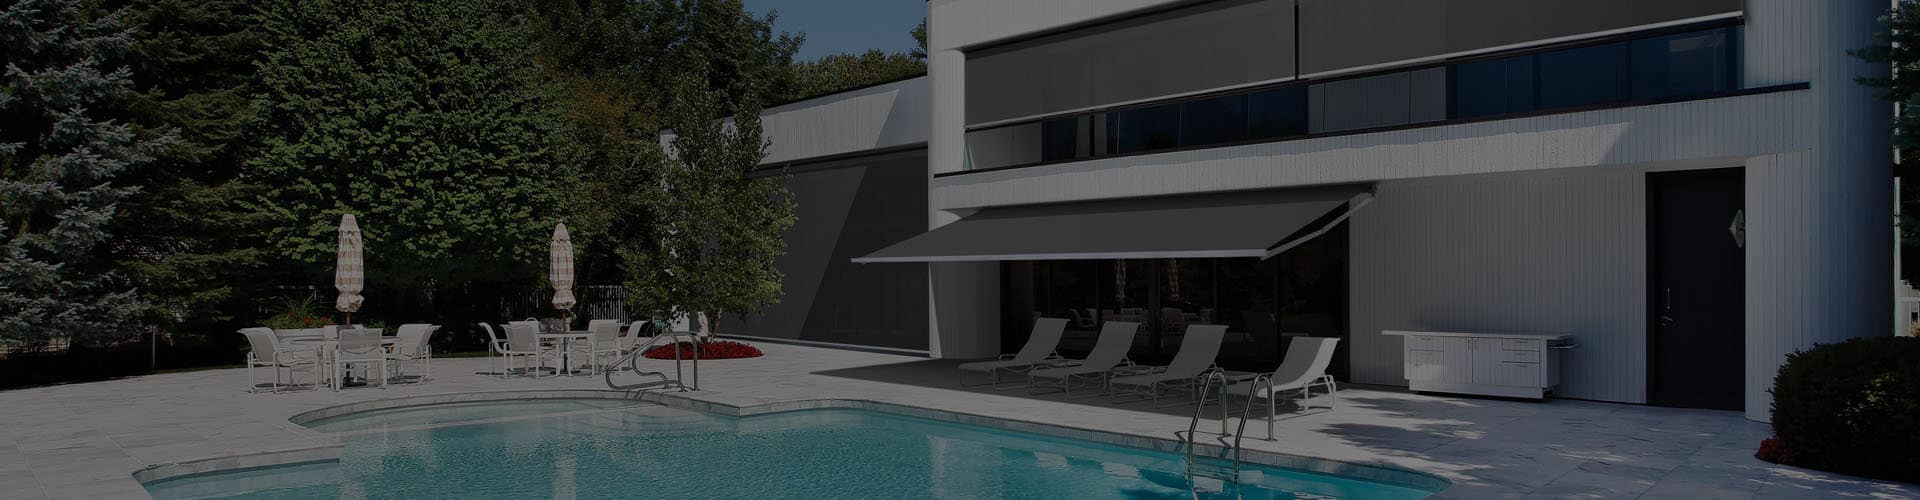 Cover image of modern home with swimming pool featuring patio installed with Folding Arm Awnings by Luxaflex. Available at Complete Blinds Sydney.